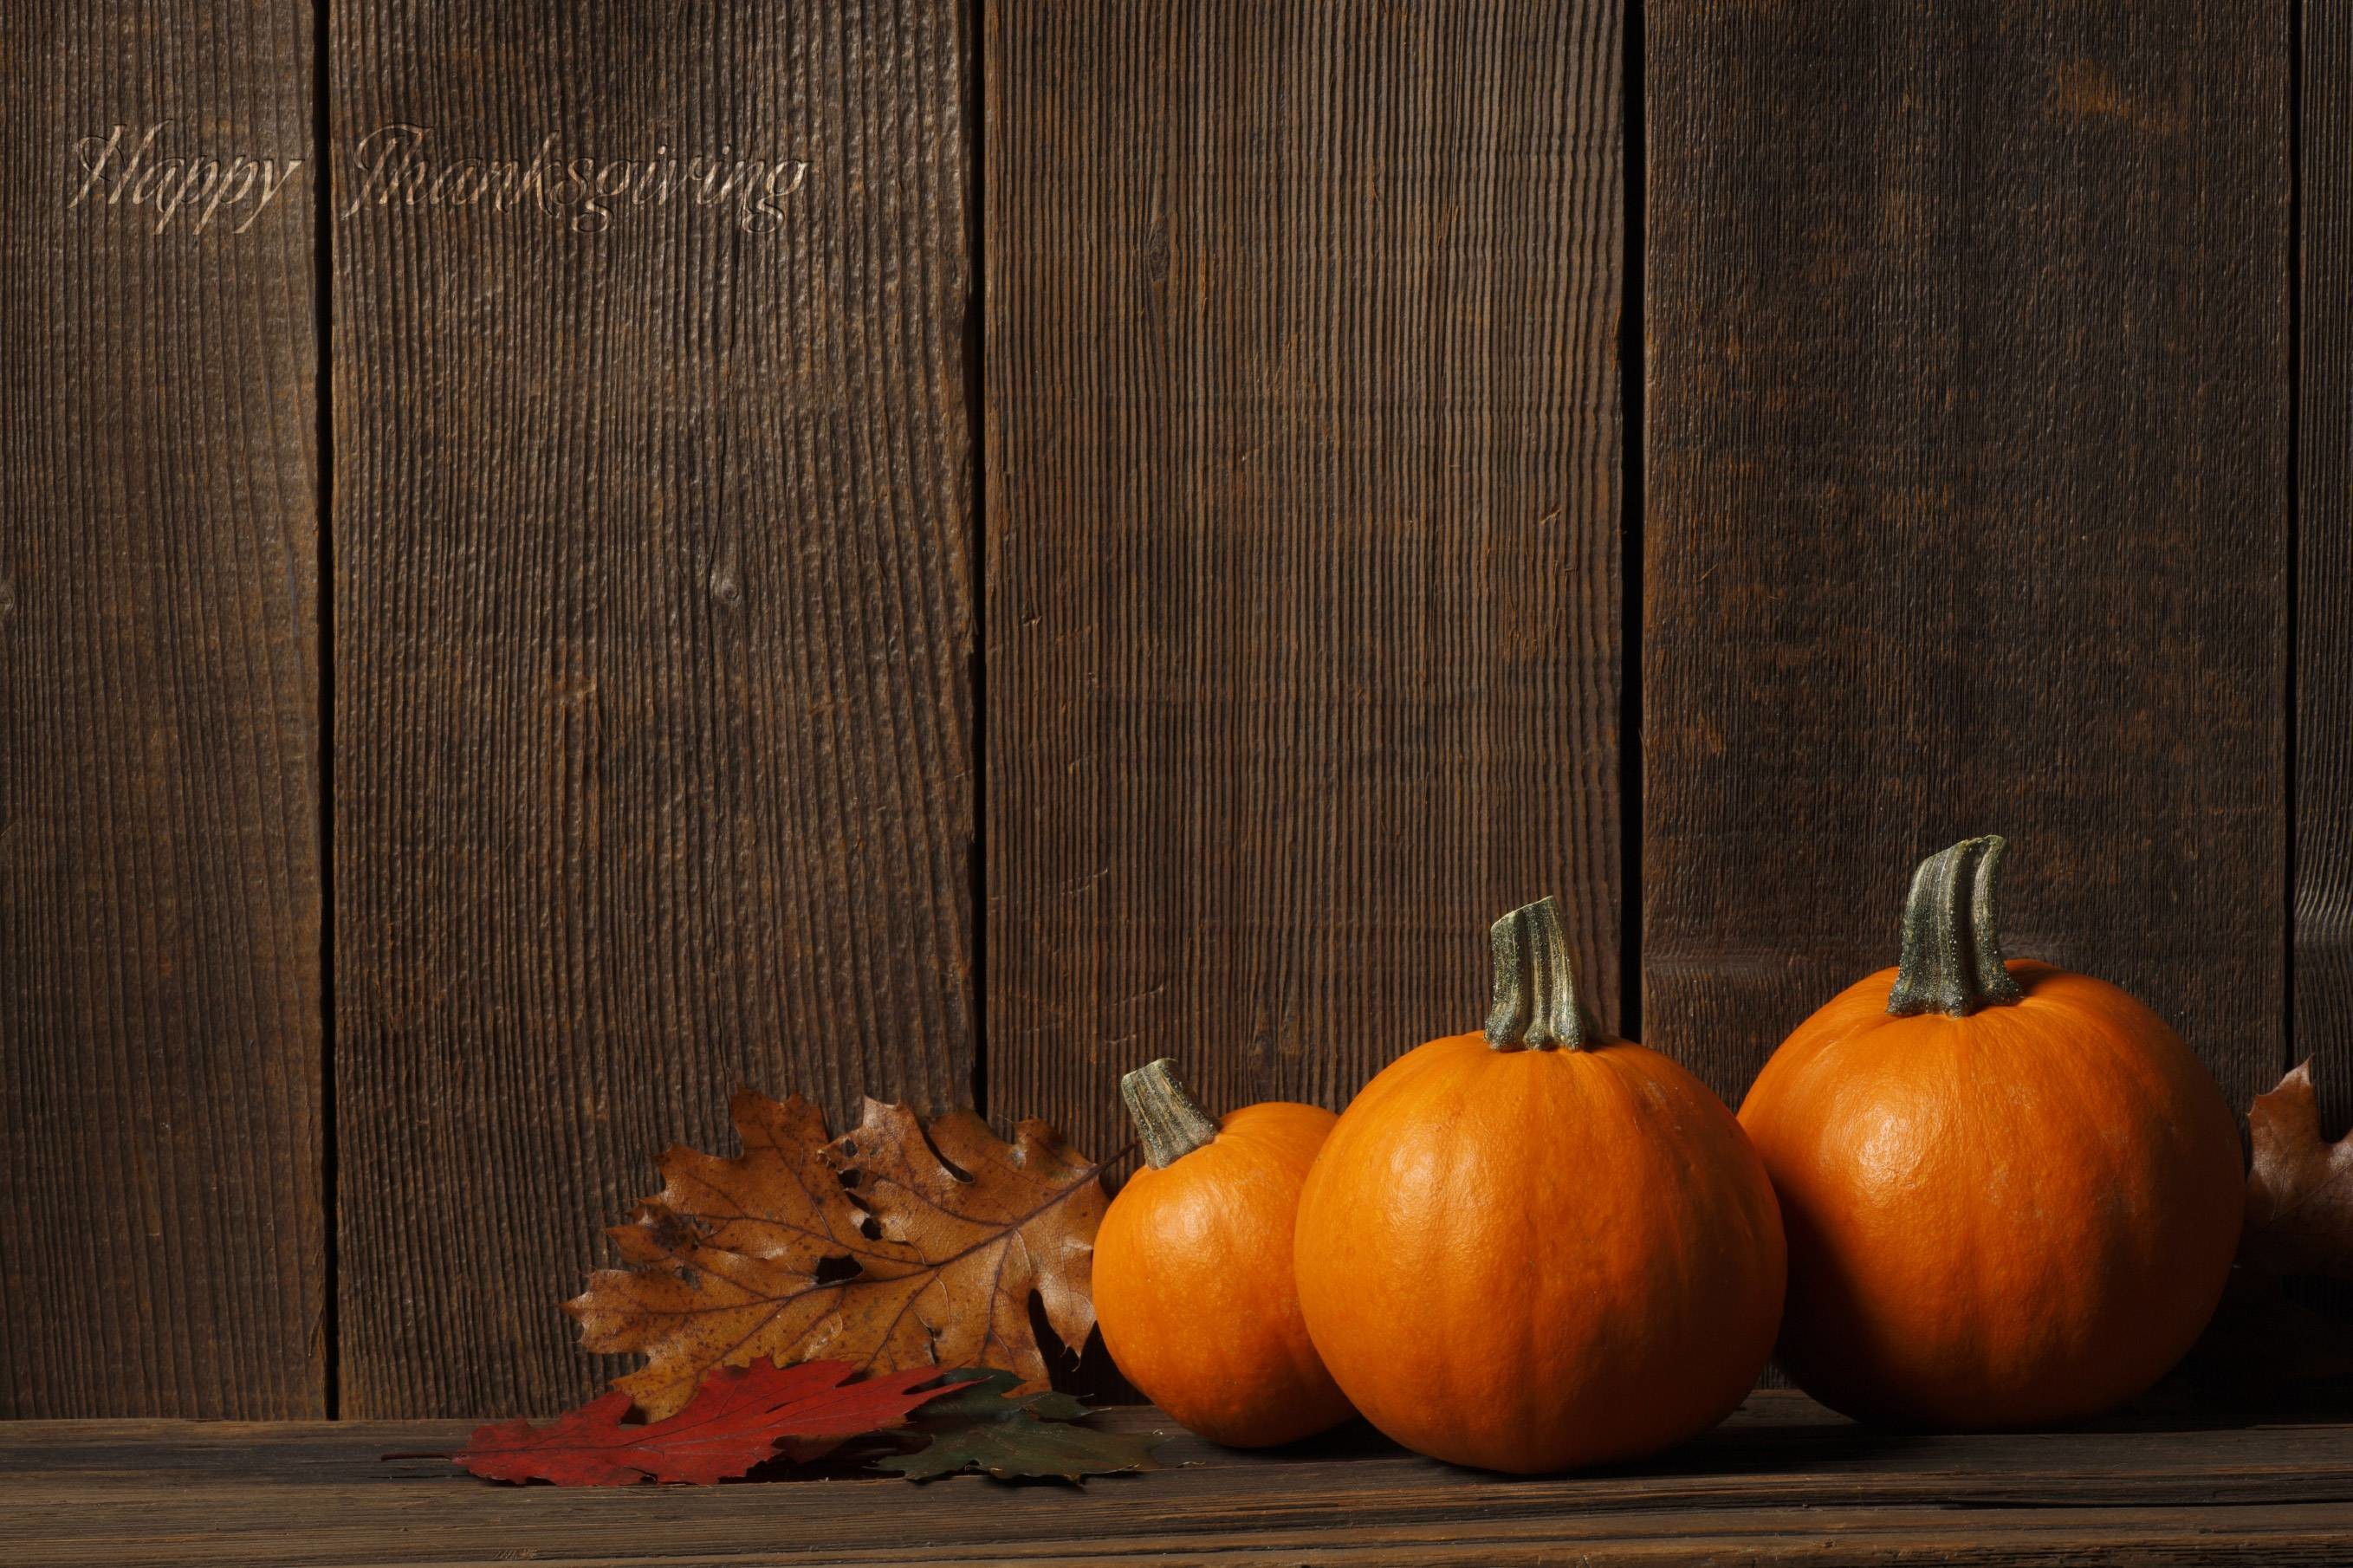 Thanksgiving Backgrounds (60+ pictures)